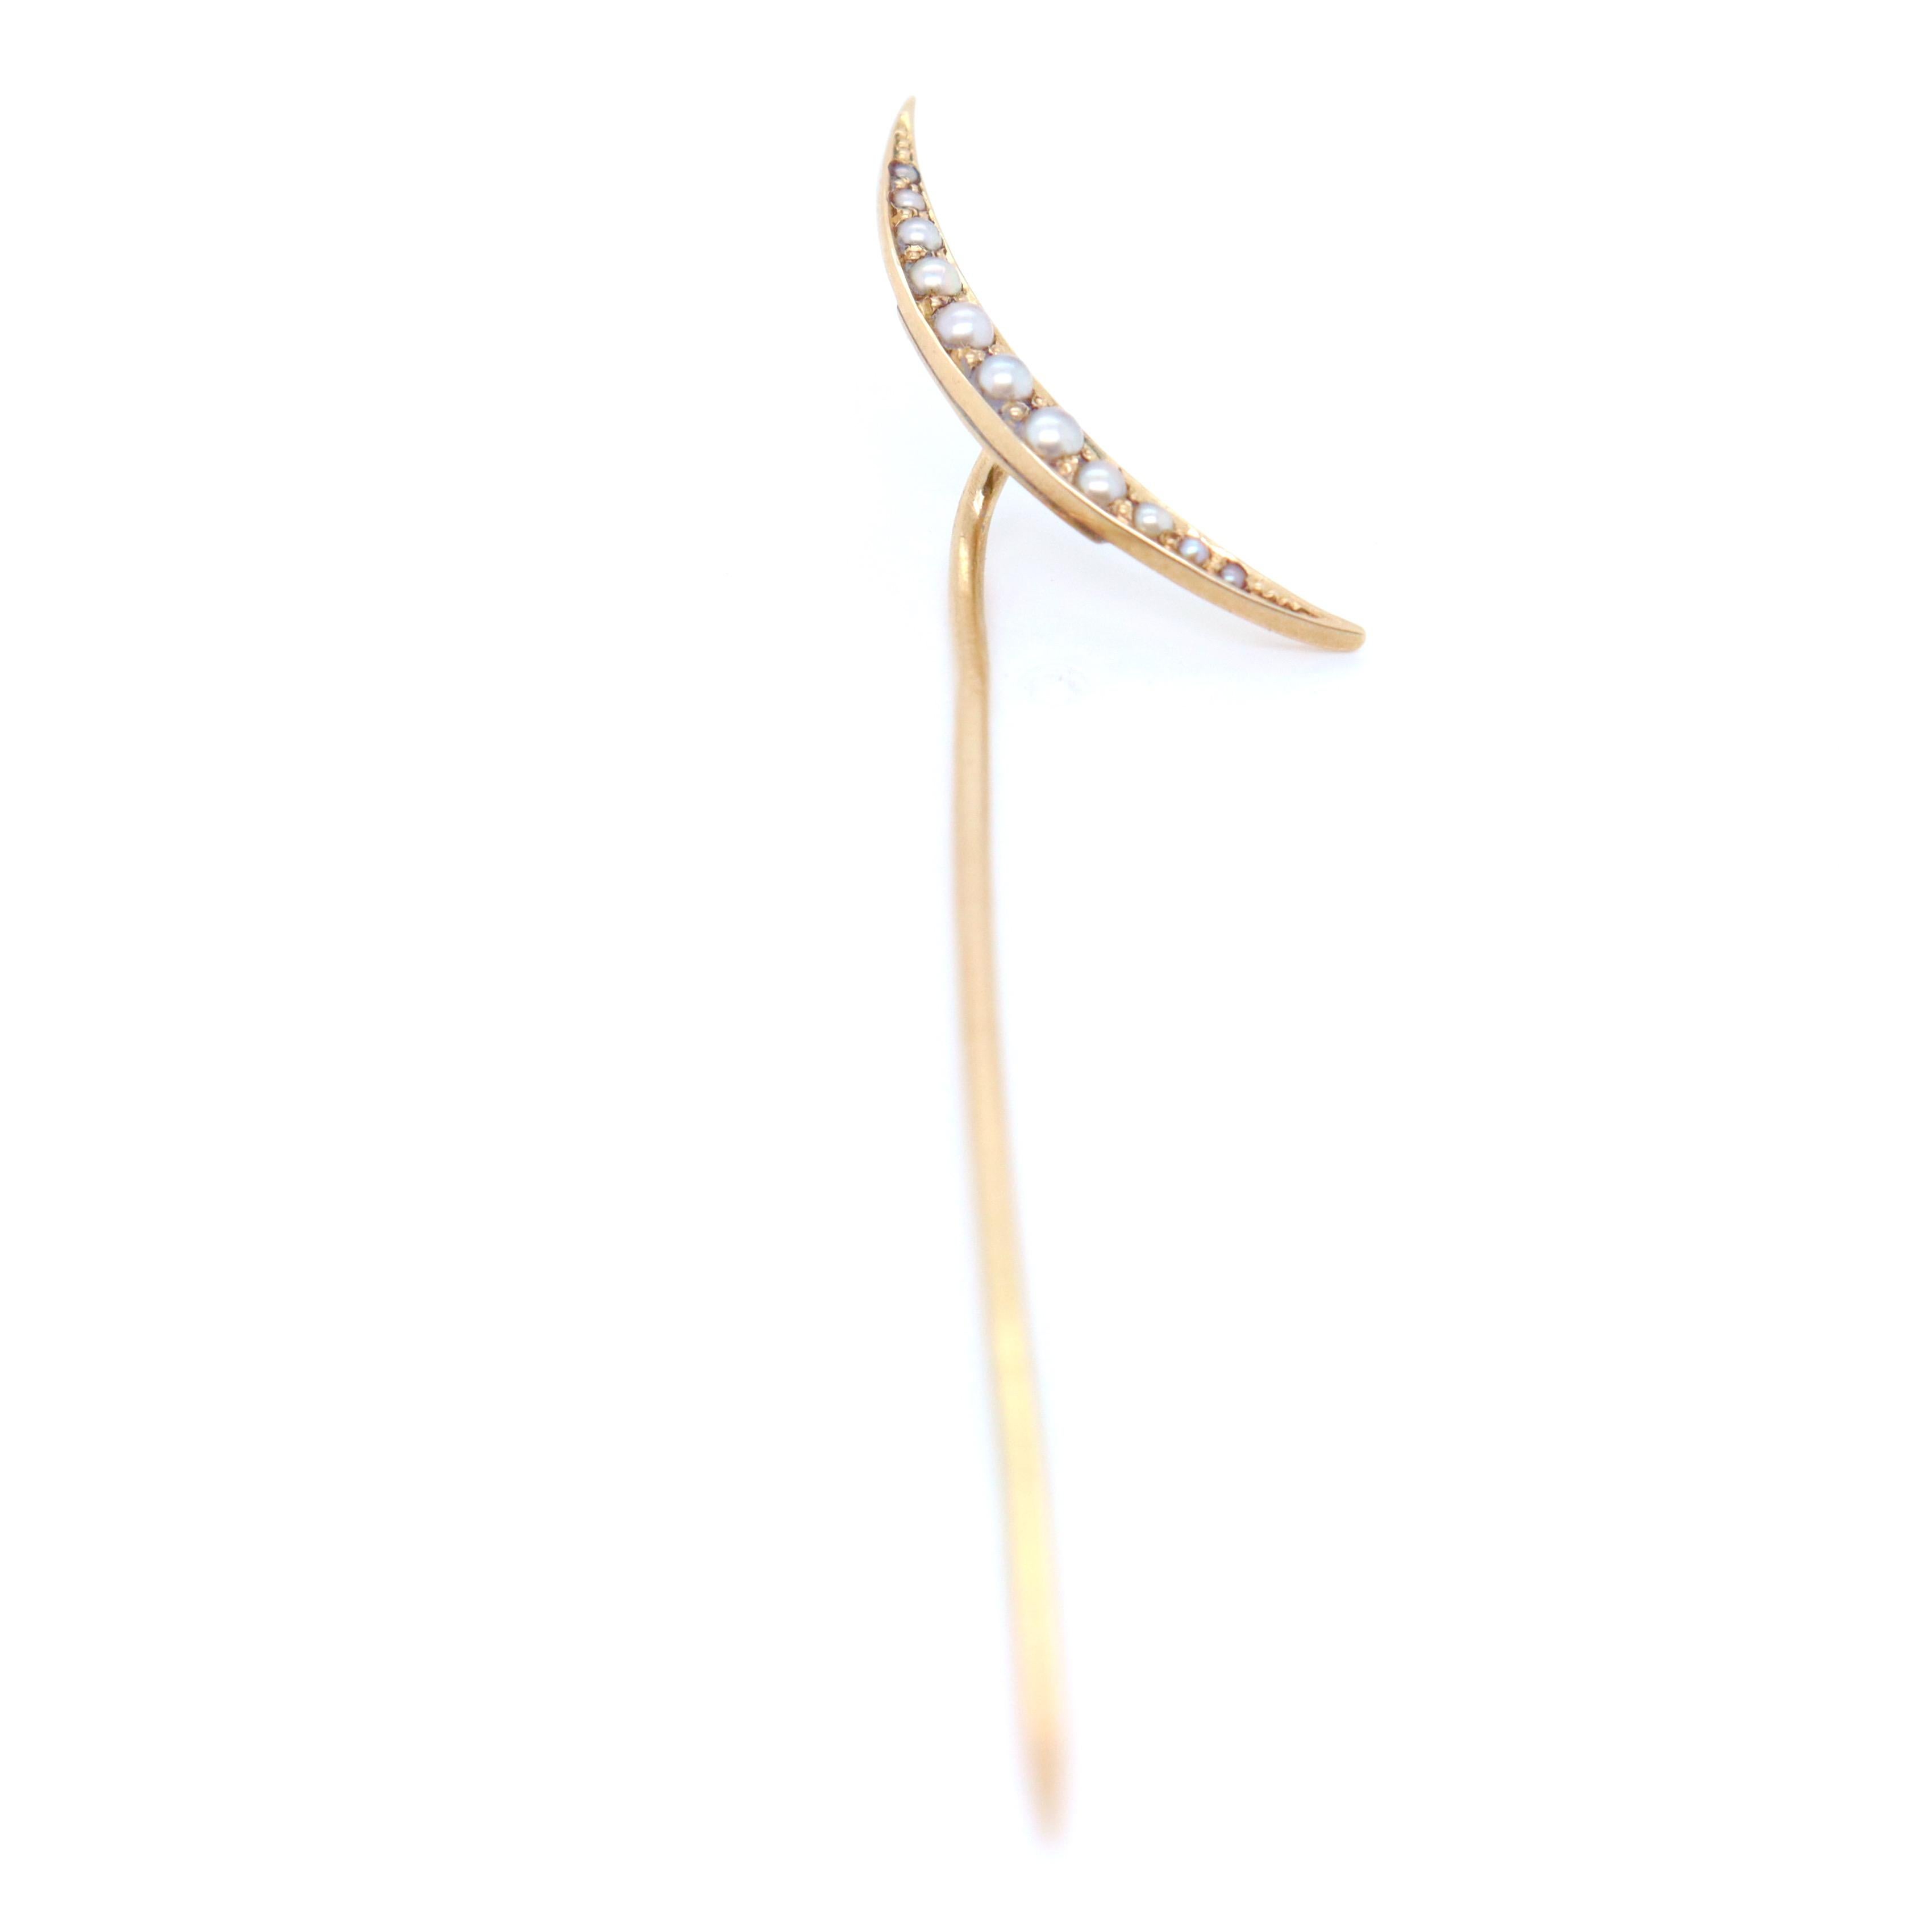 Antique 14k Gold & Seed Pearl Crescent Moon Stick Pin For Sale 1